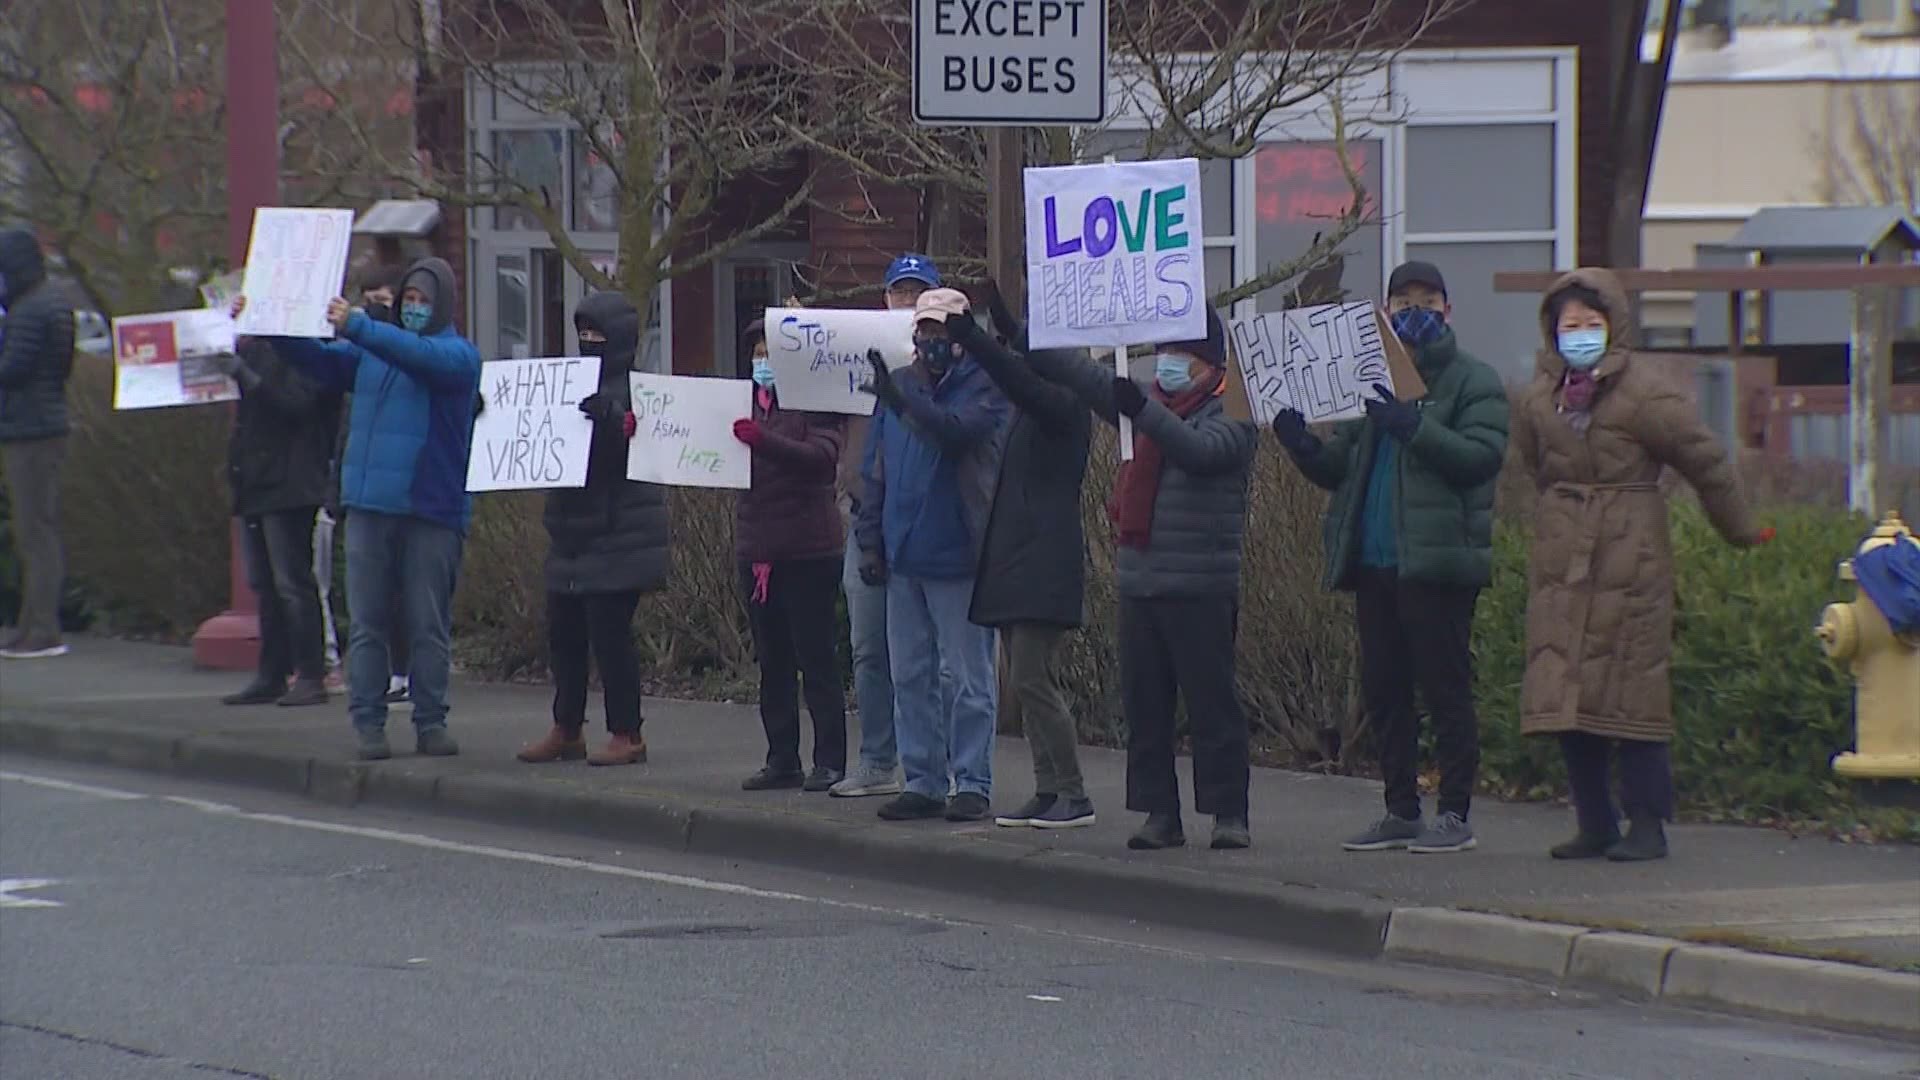 Hundreds of people gathered in western Washington this weekend to "Unite Against Hate" towards the Asian community.